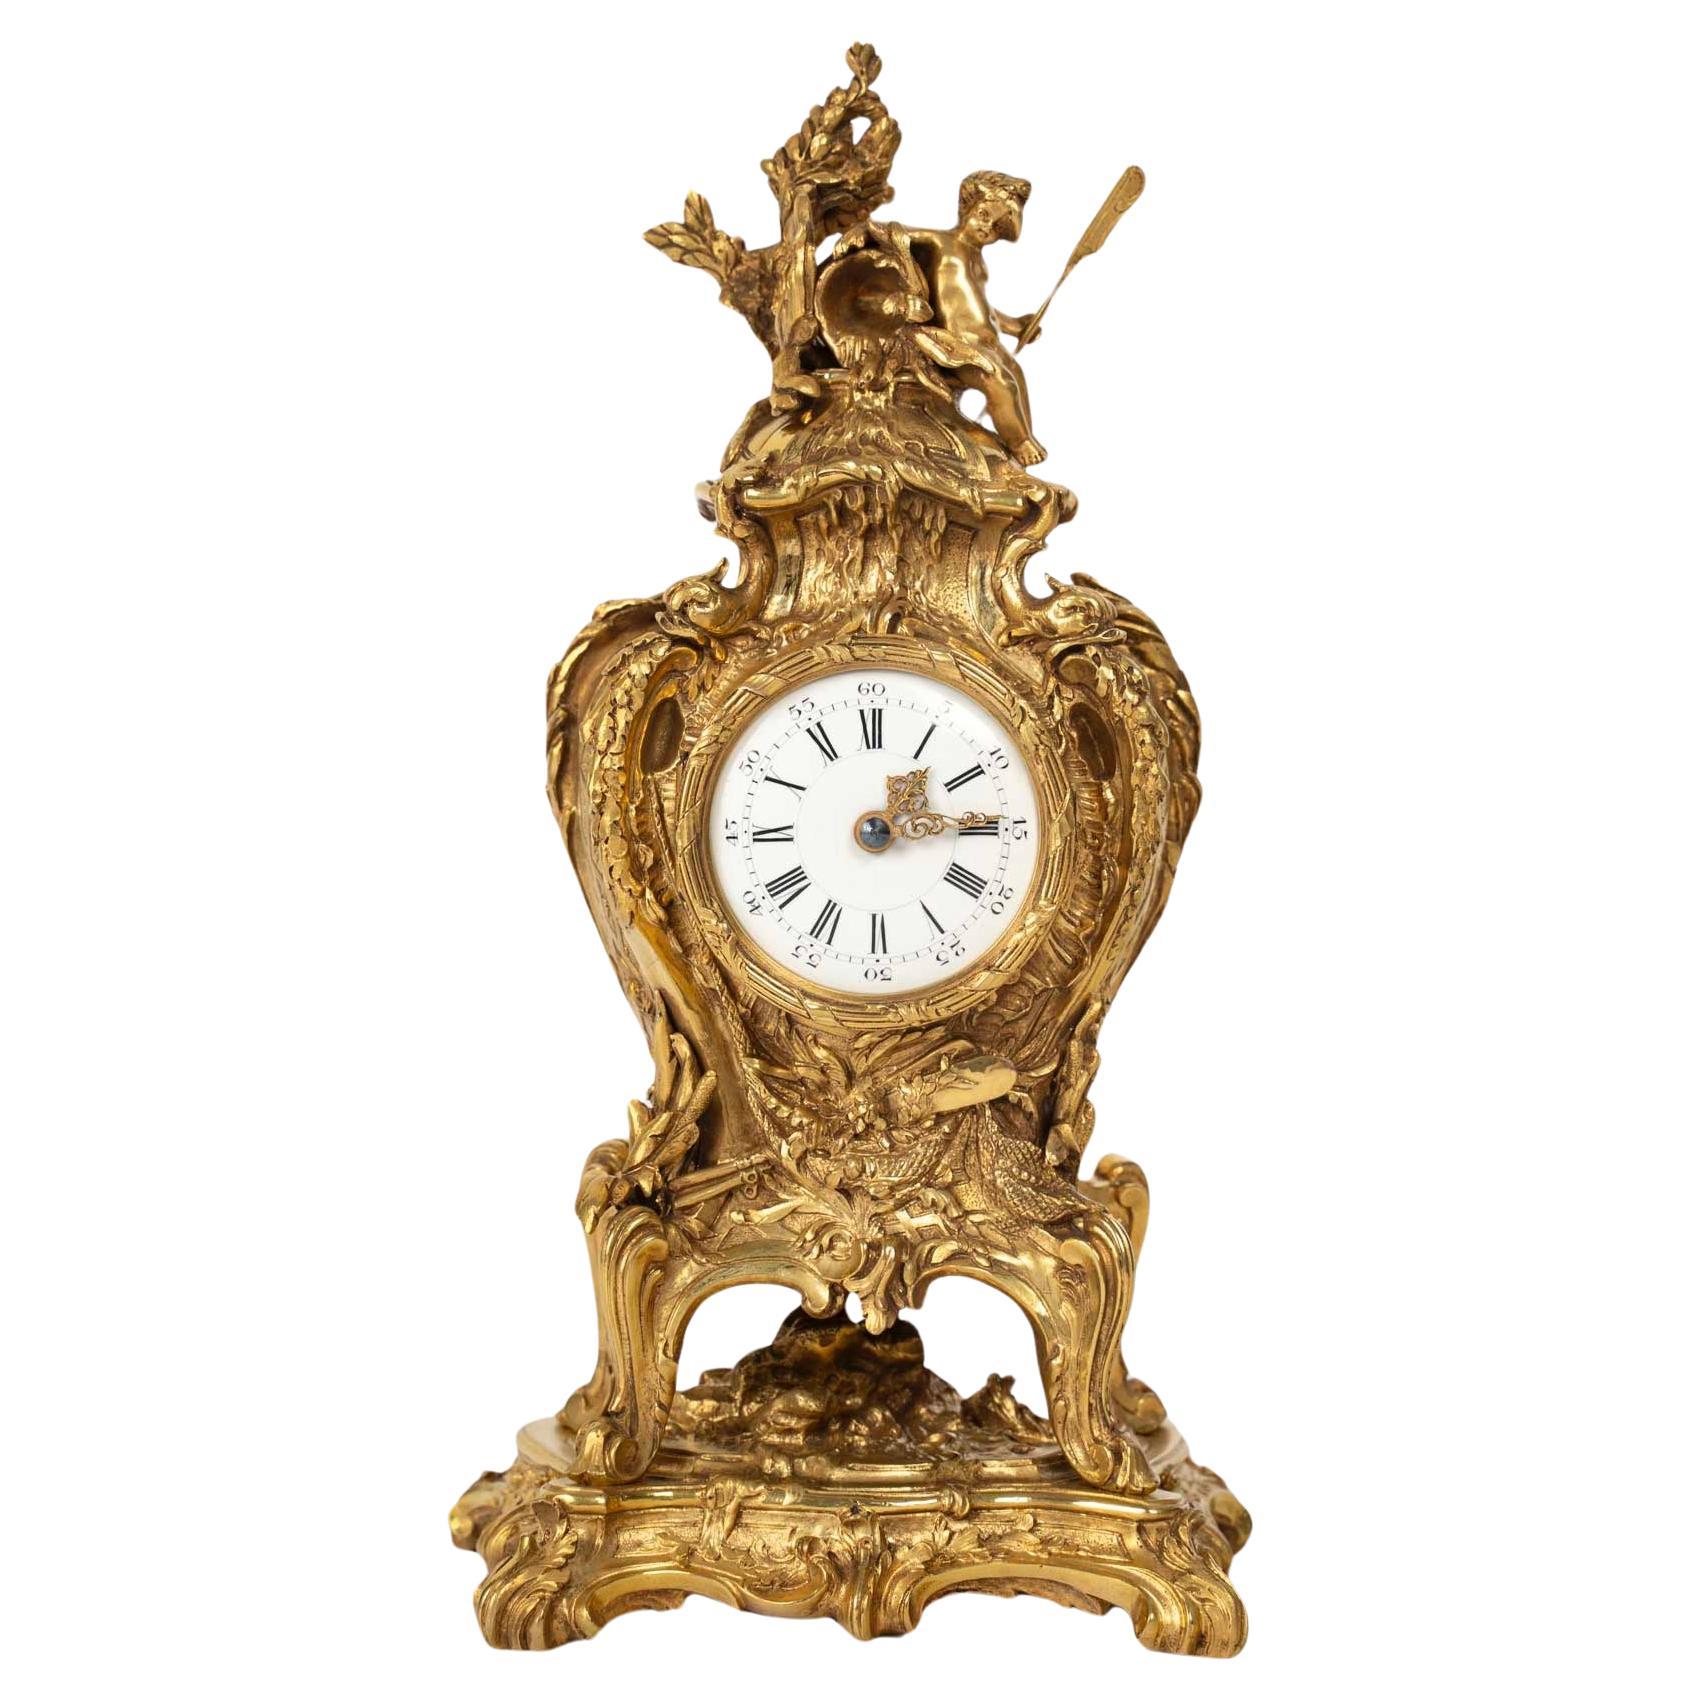 Attributed to L.Messagé (1842-1901) and F.Linke, "Source Allegory" Clock For Sale